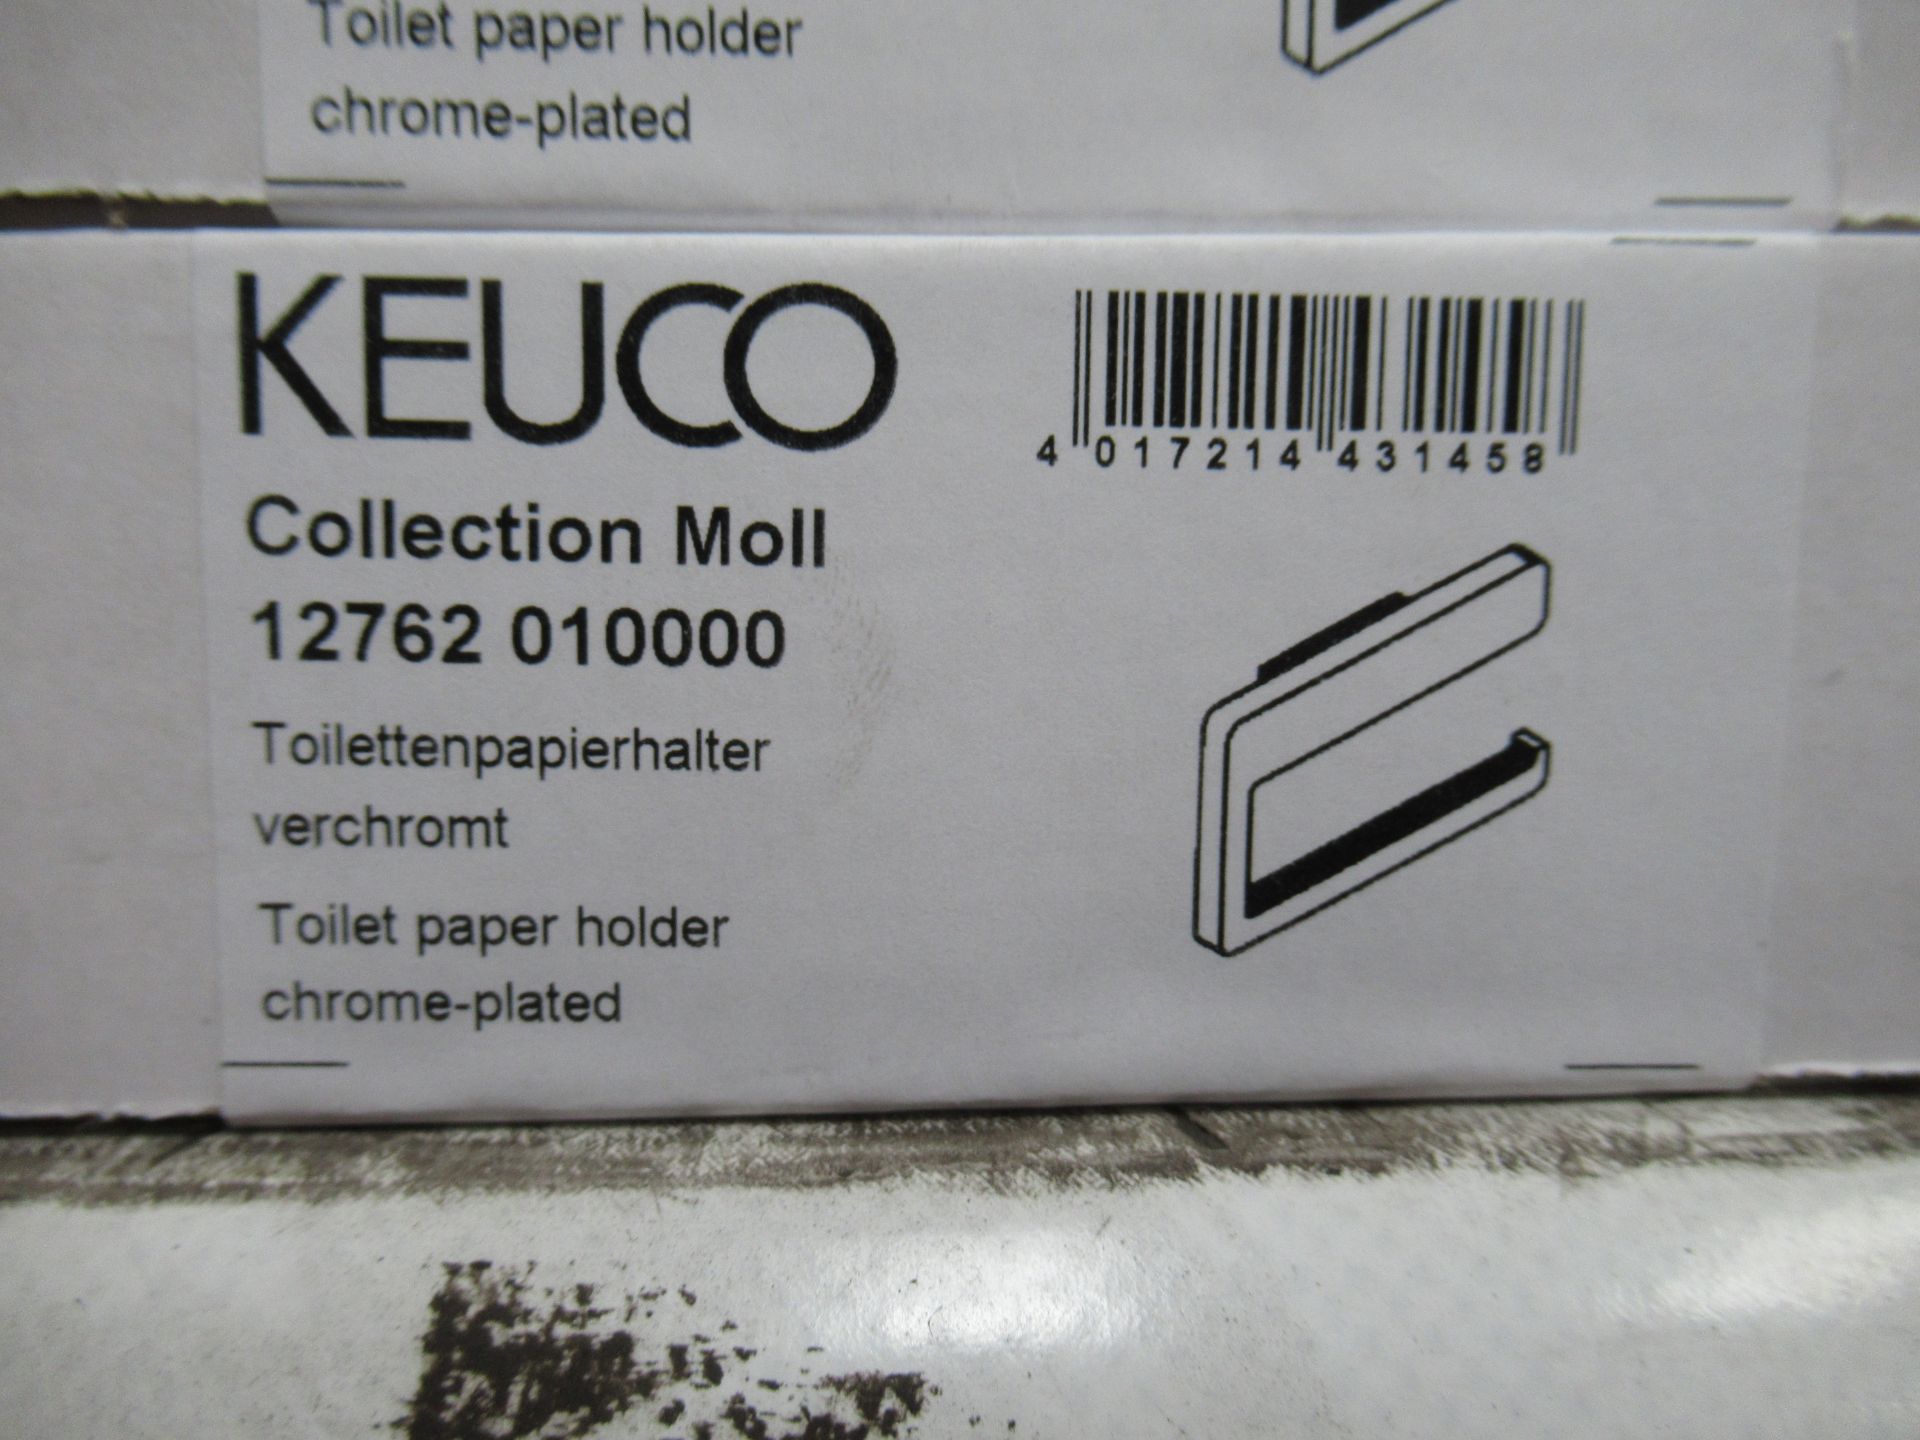 3 x Keuco Colelction Moll Toilet Paper Holders, Chrome Plated, P/N 12762-010000 - Image 2 of 2